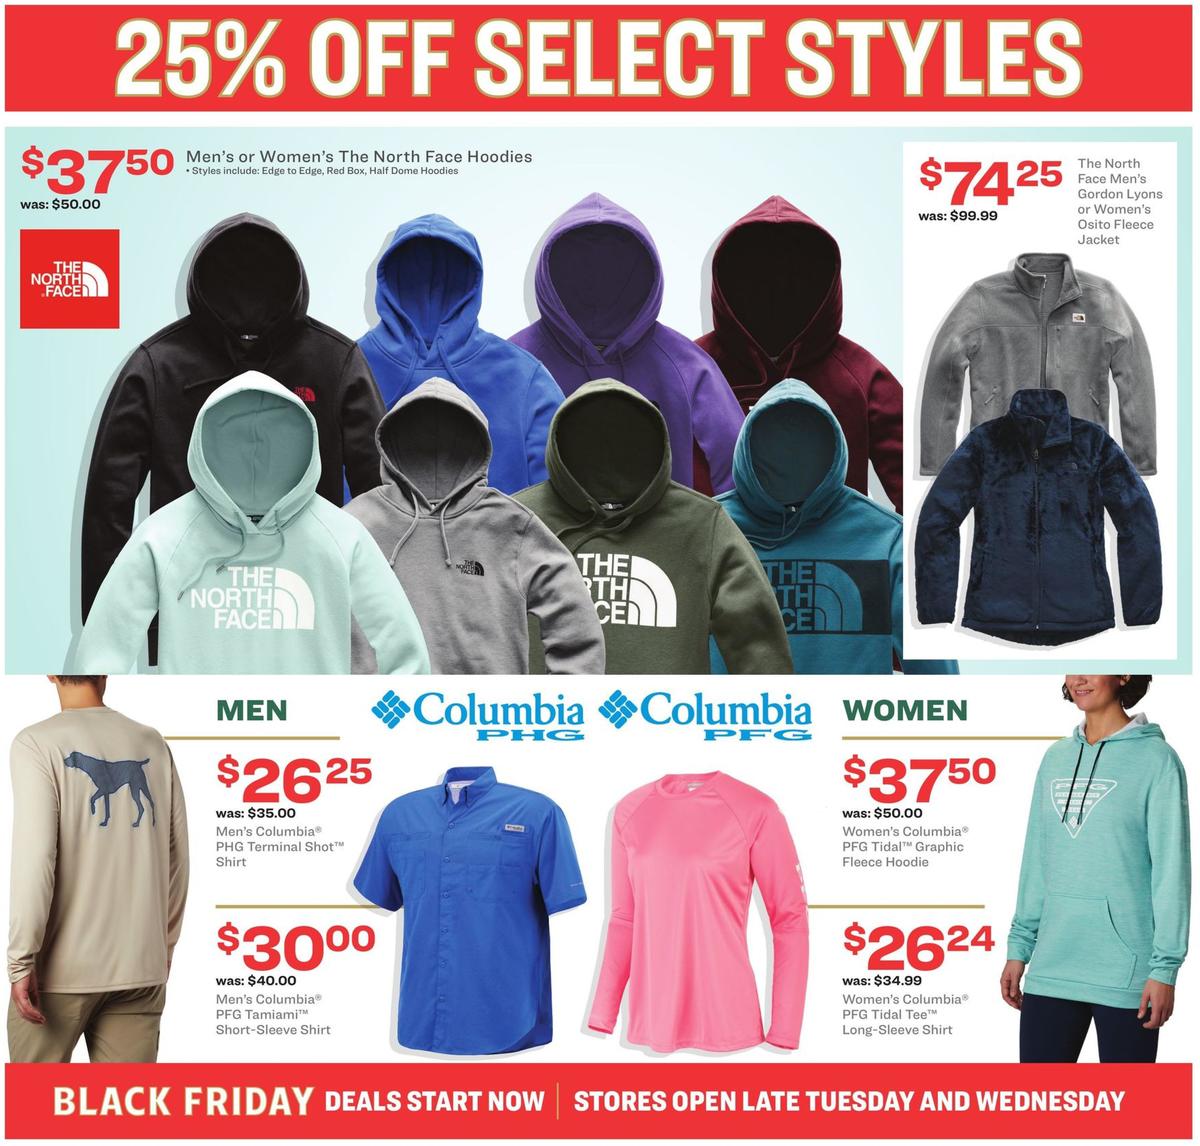 Academy Sports + Outdoors Weekly Ad from November 24